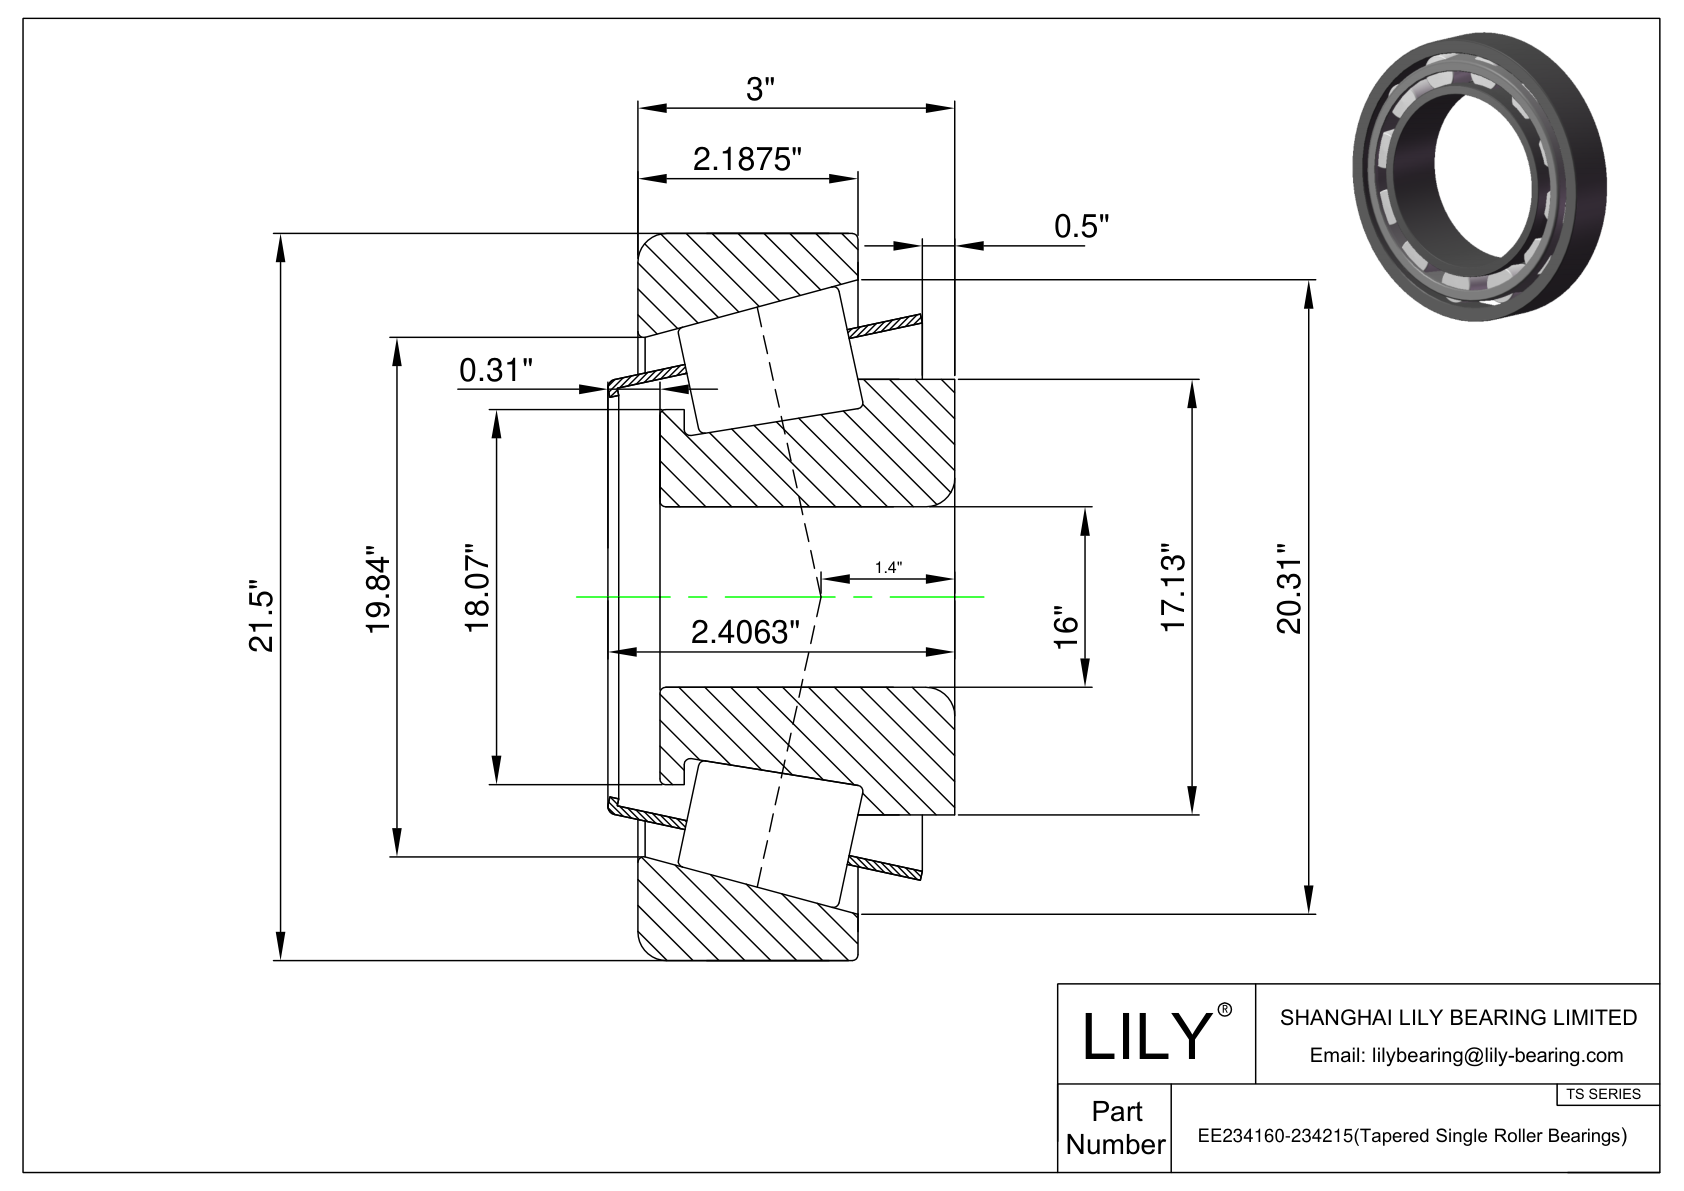 EE234160-234215 TS (Tapered Single Roller Bearings) (Imperial) cad drawing